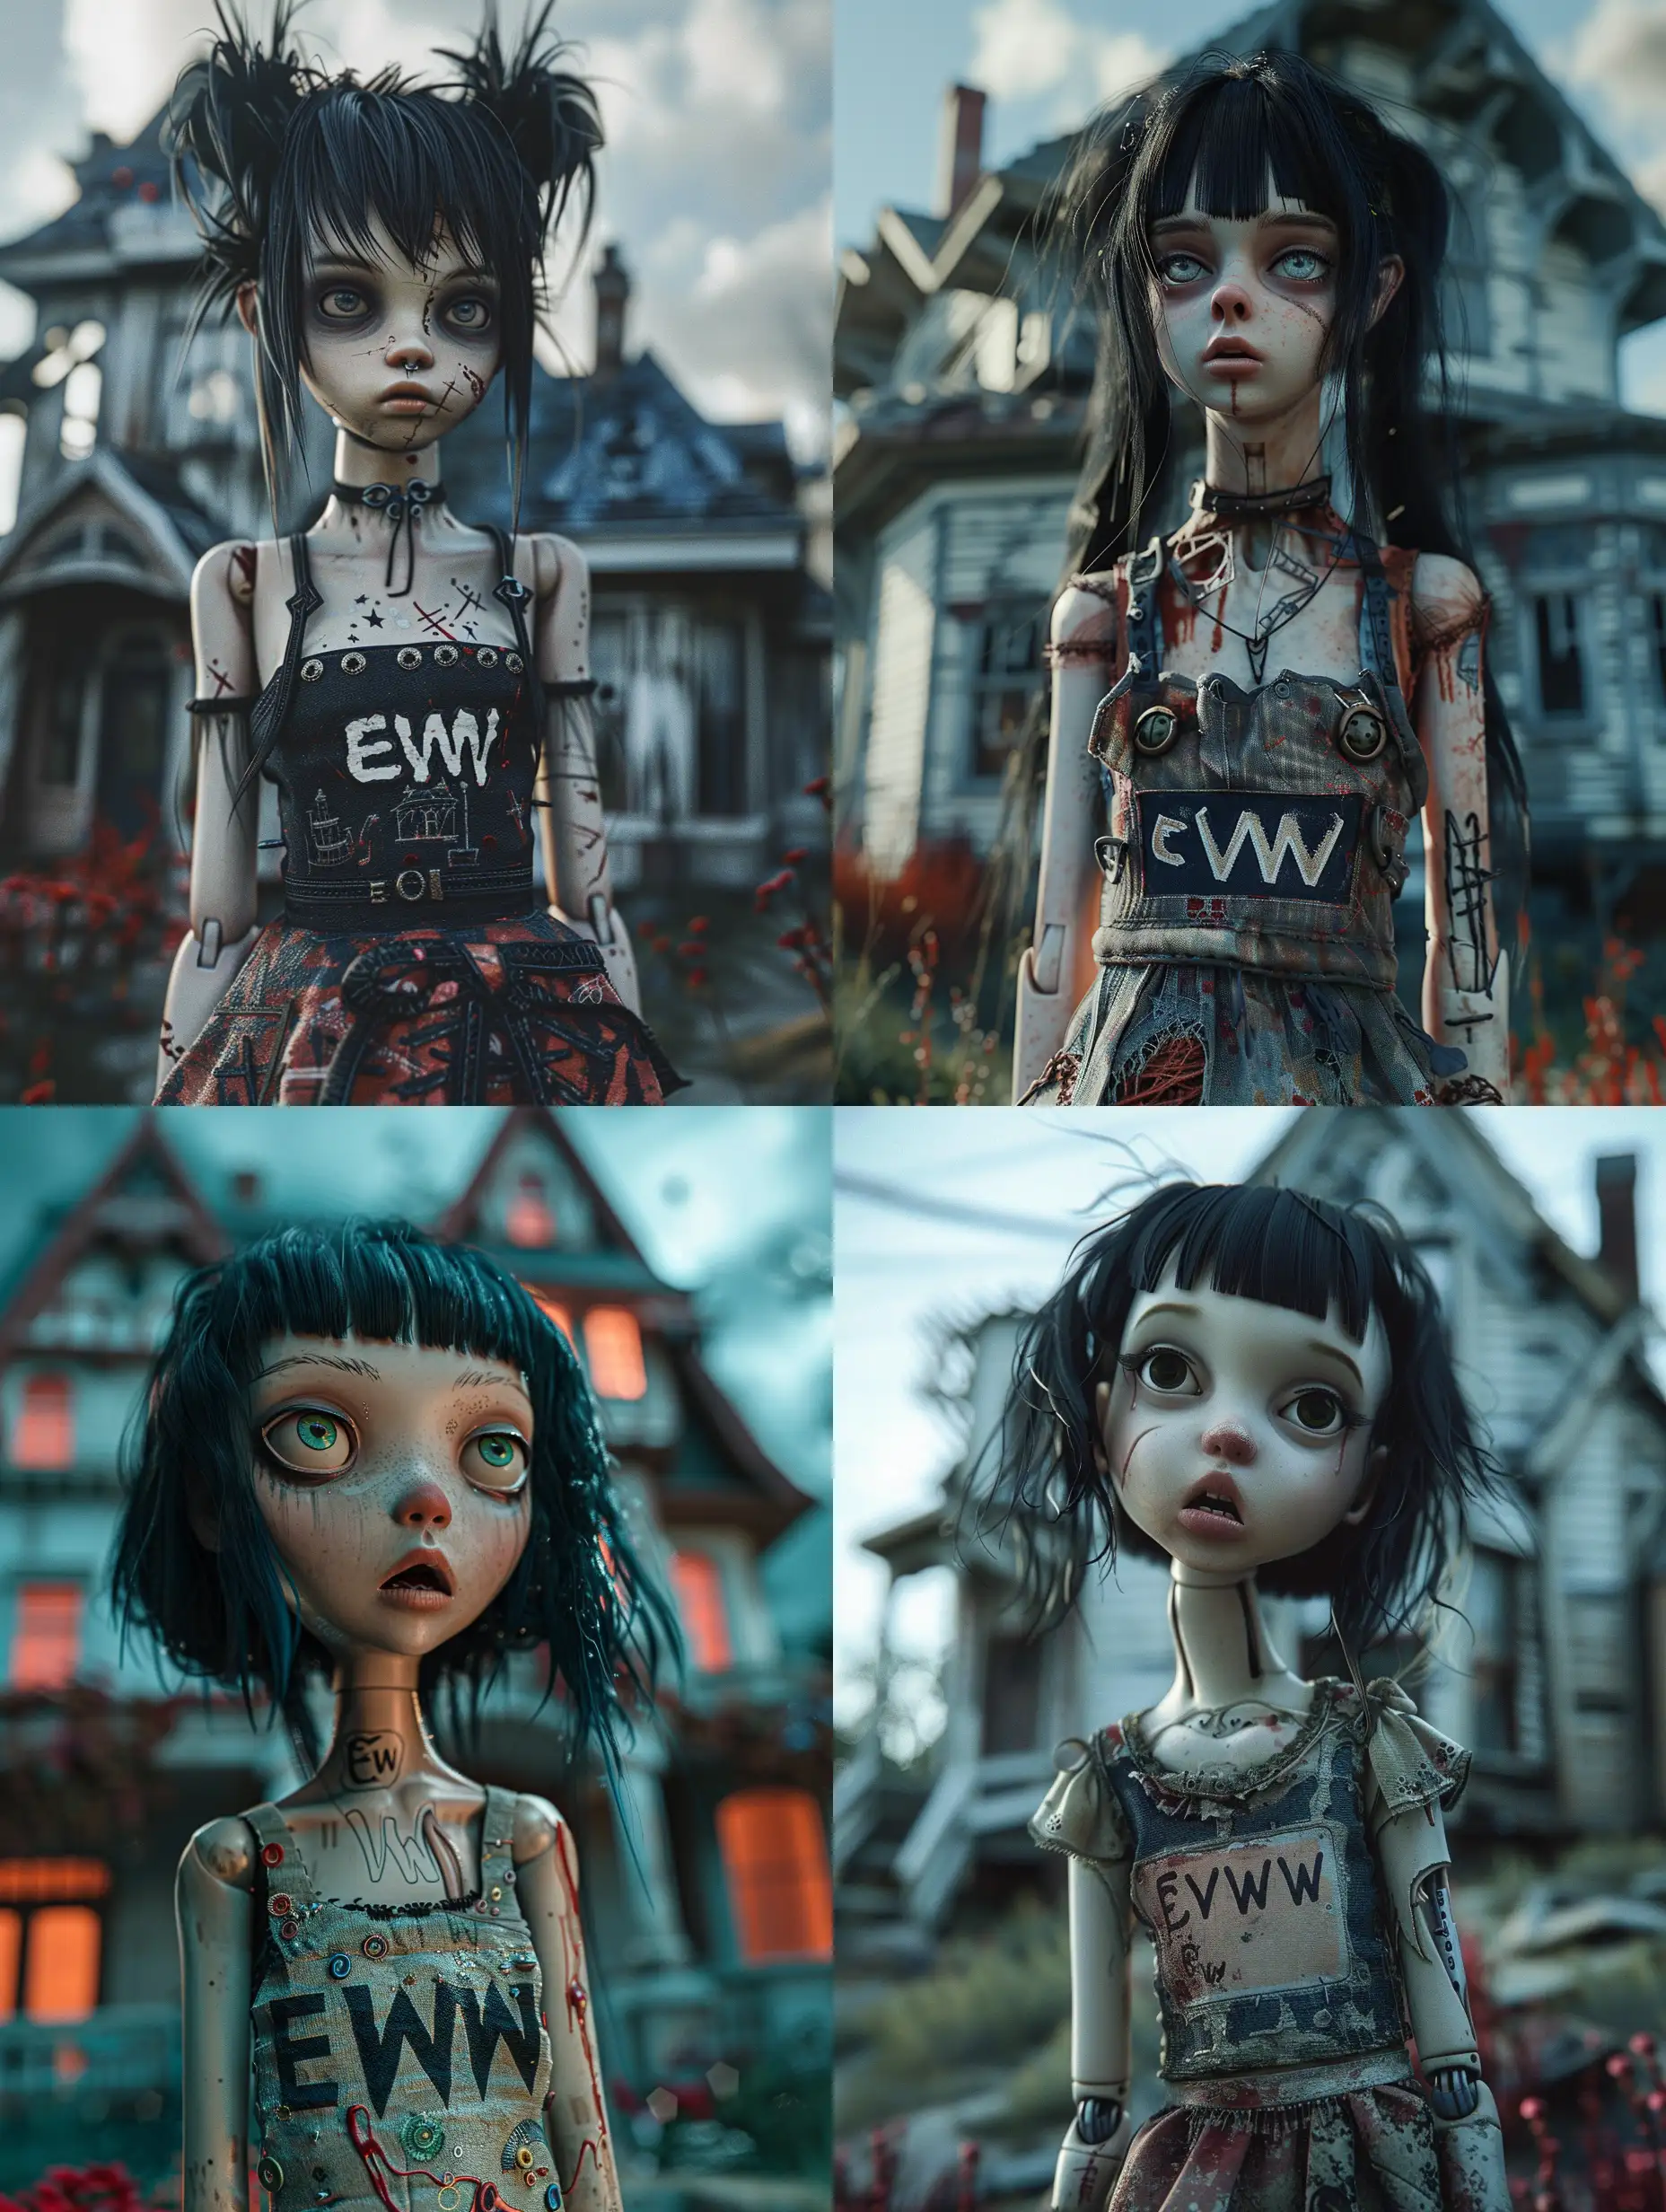 Tim-BurtonStyle-Fantasy-Doll-in-Front-of-an-Old-House-with-Surreal-Elements